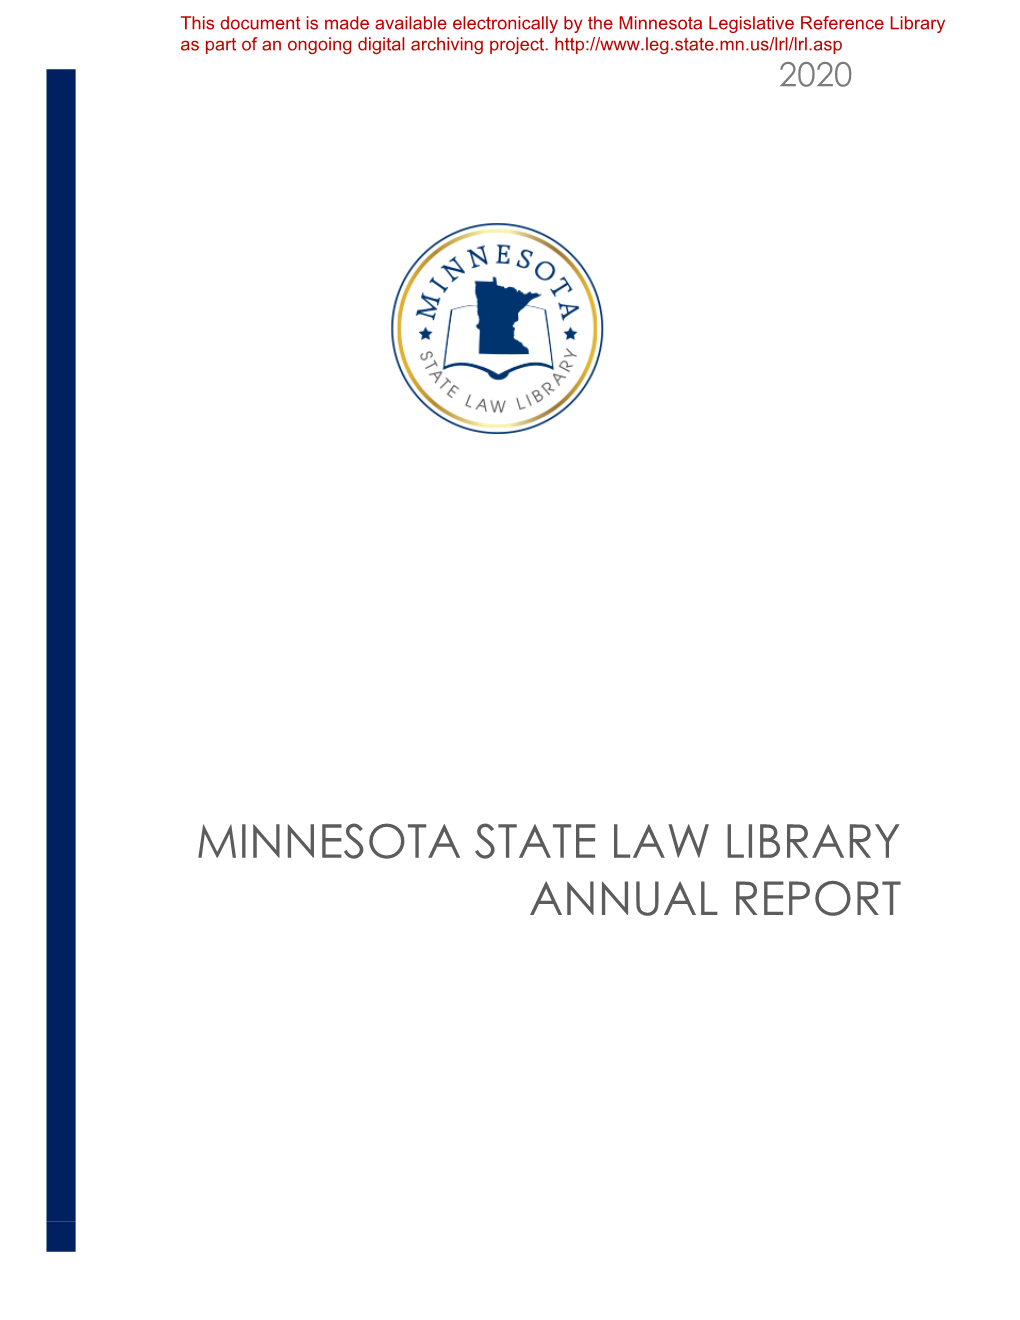 Minnesota State Law Library Annual Report